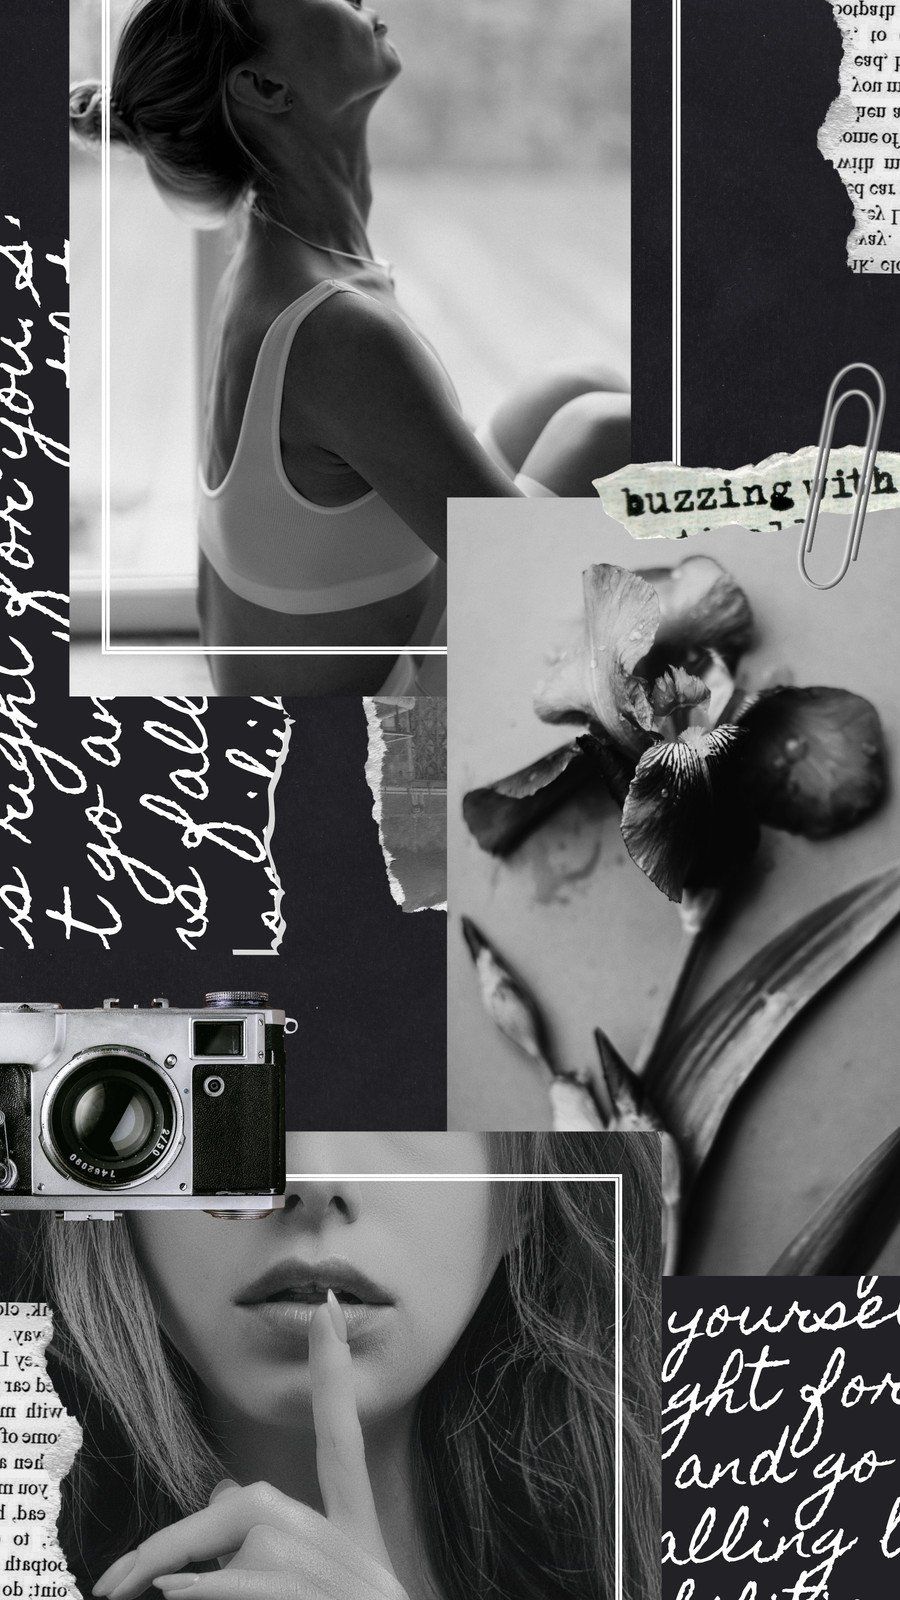 A black and white collage featuring a woman, a camera, and flowers. - Gray